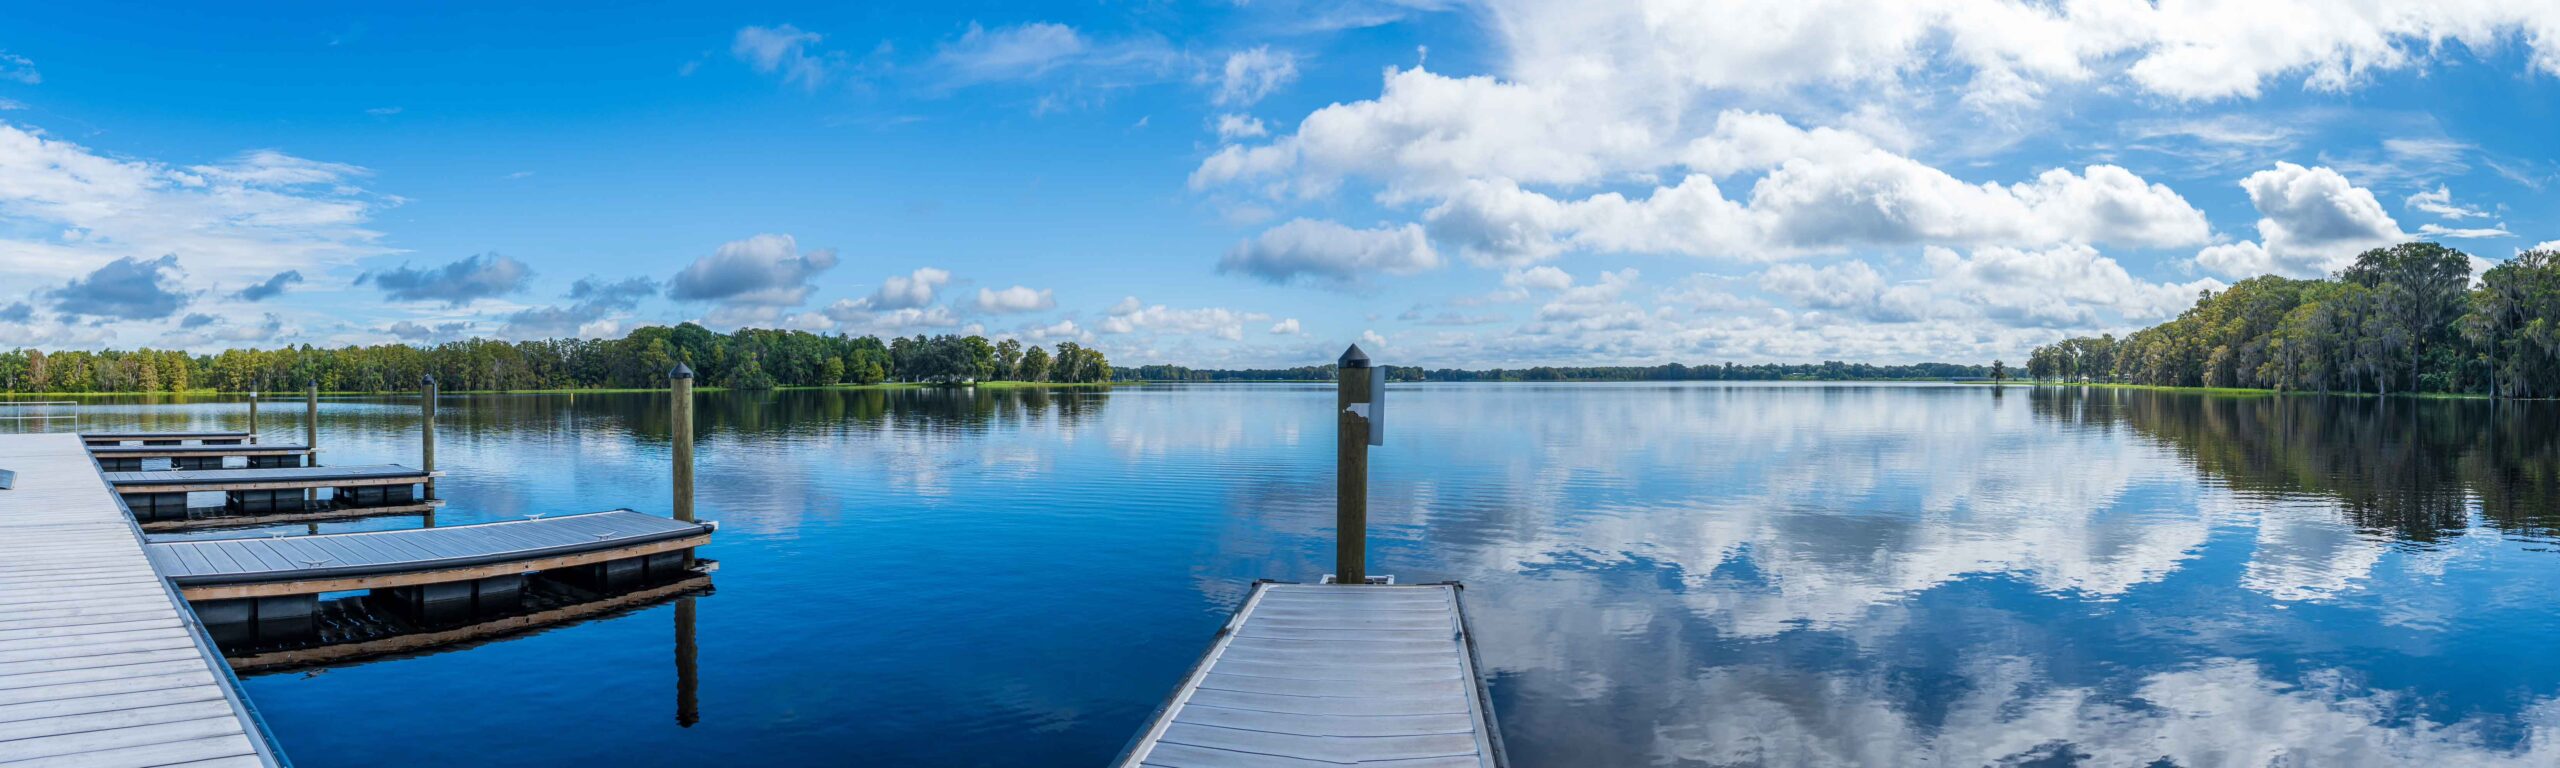 Panorama of Henderson Lake from Wallace Brooks Park boat dock - Inverness, Florida, USA